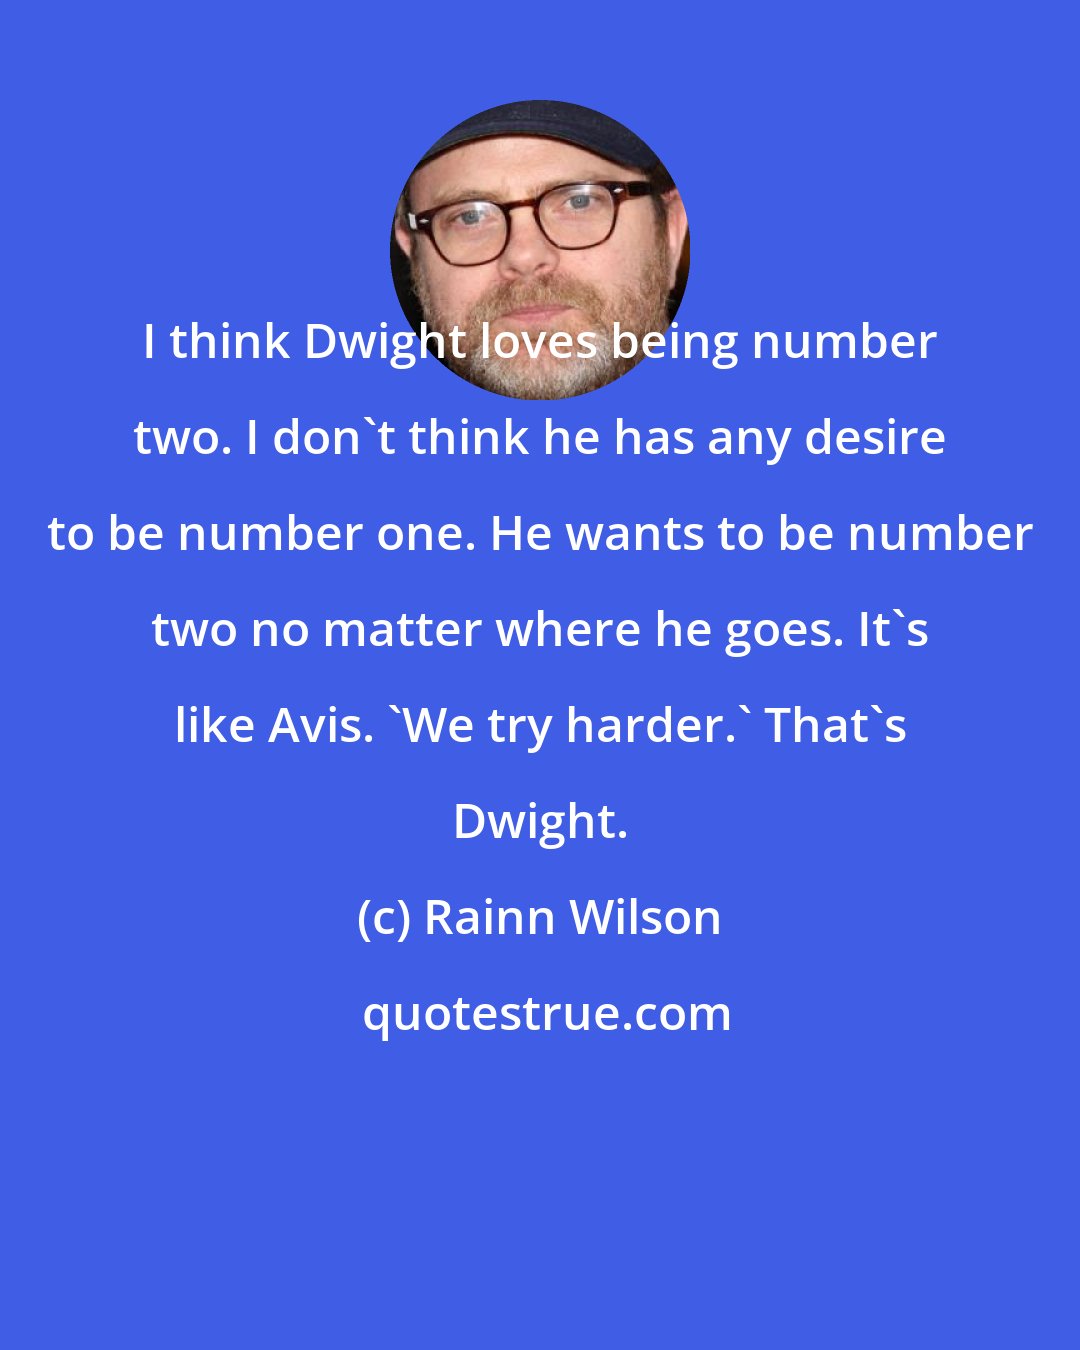 Rainn Wilson: I think Dwight loves being number two. I don't think he has any desire to be number one. He wants to be number two no matter where he goes. It's like Avis. 'We try harder.' That's Dwight.